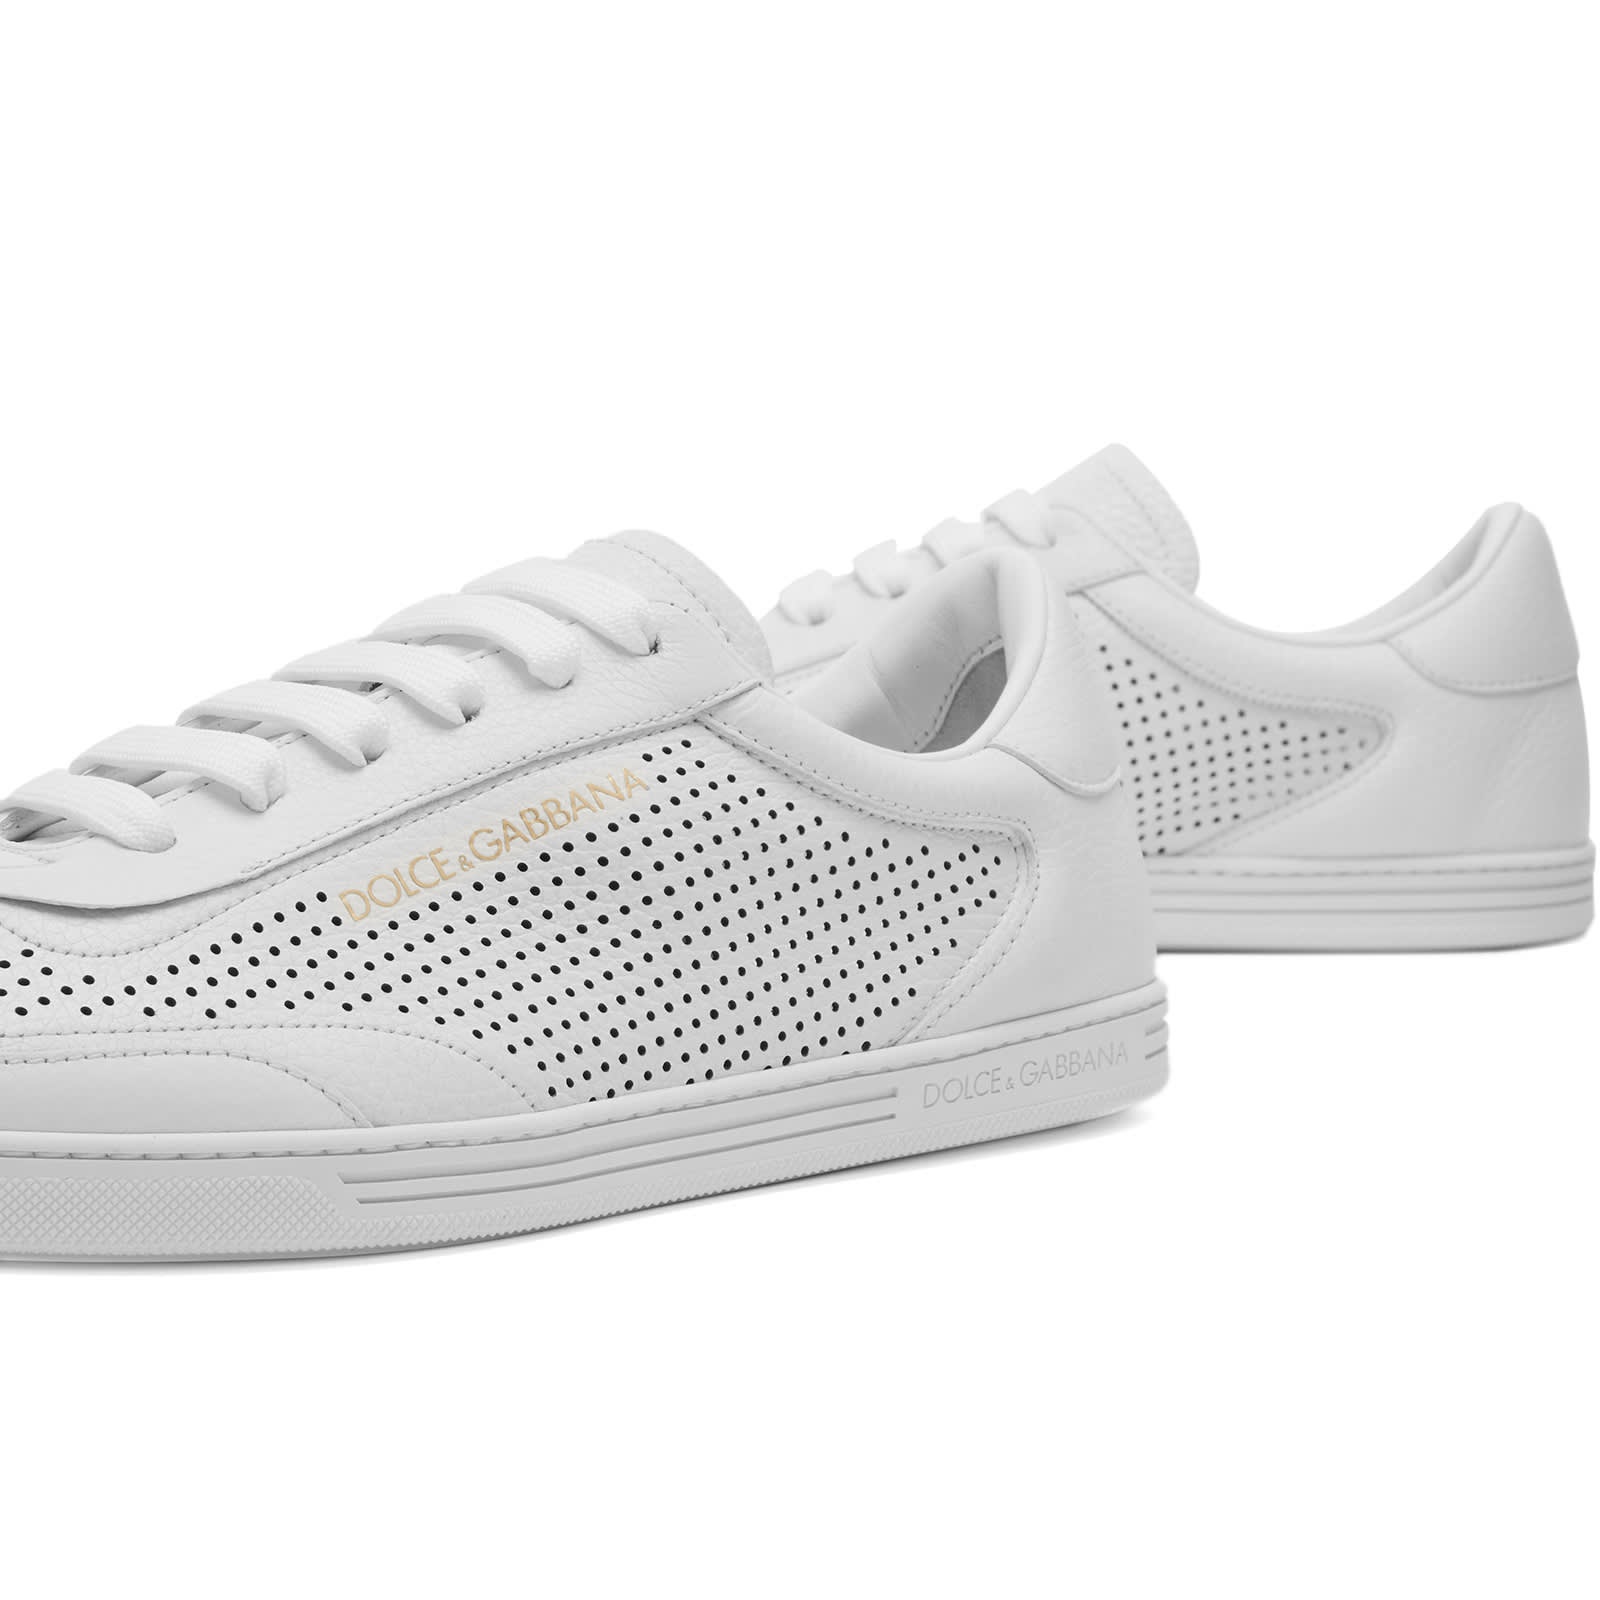 Dolce & Gabbana Saint Tropez Perforated Leather Sneaker - 3